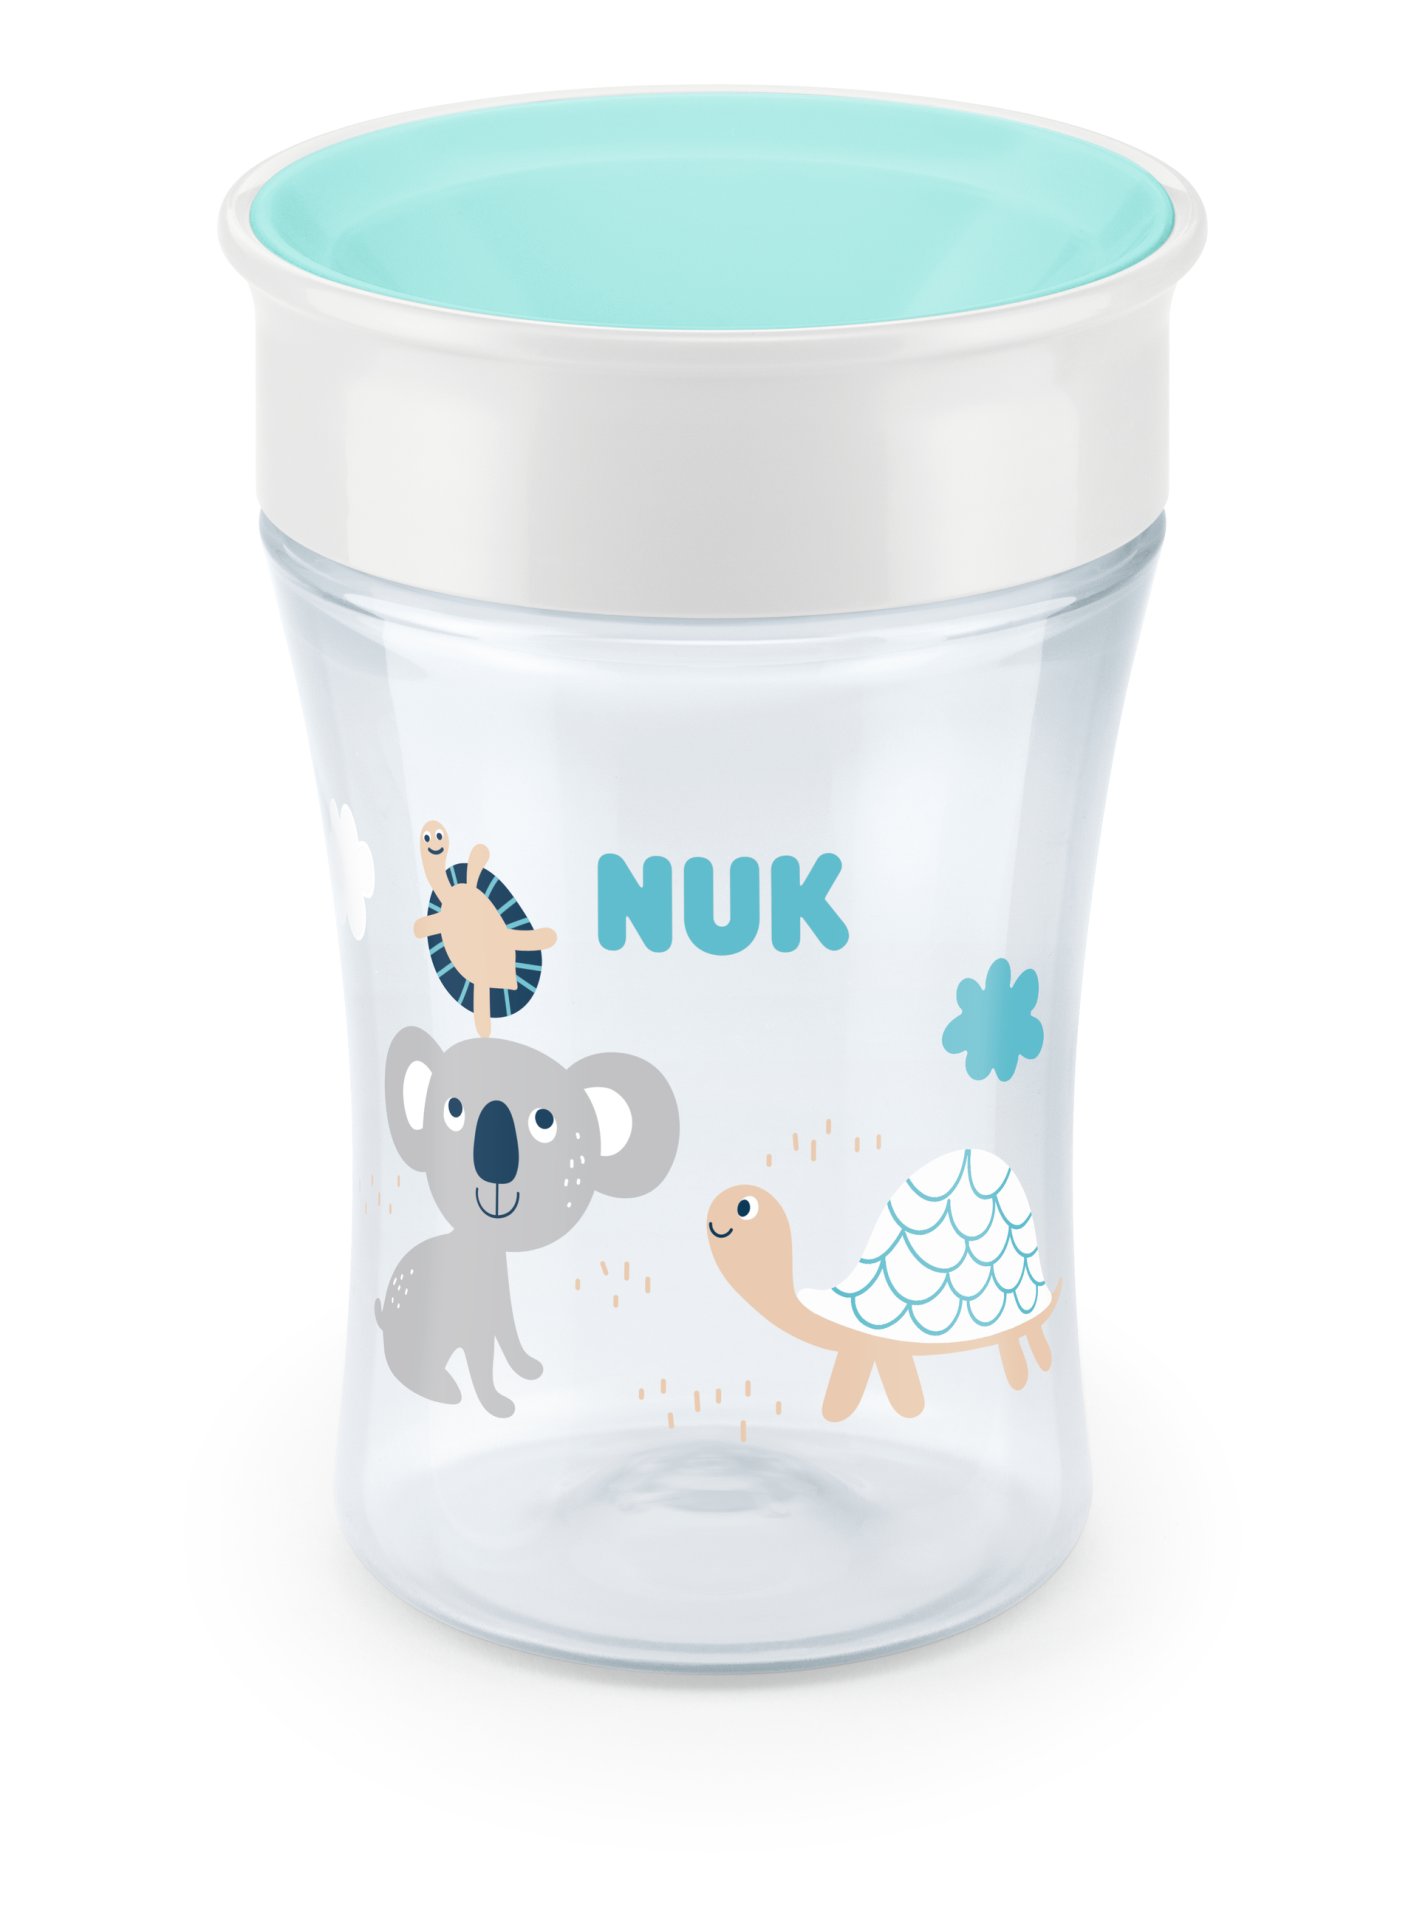 Nuk Magic Cup 8m+ - Best For Baby